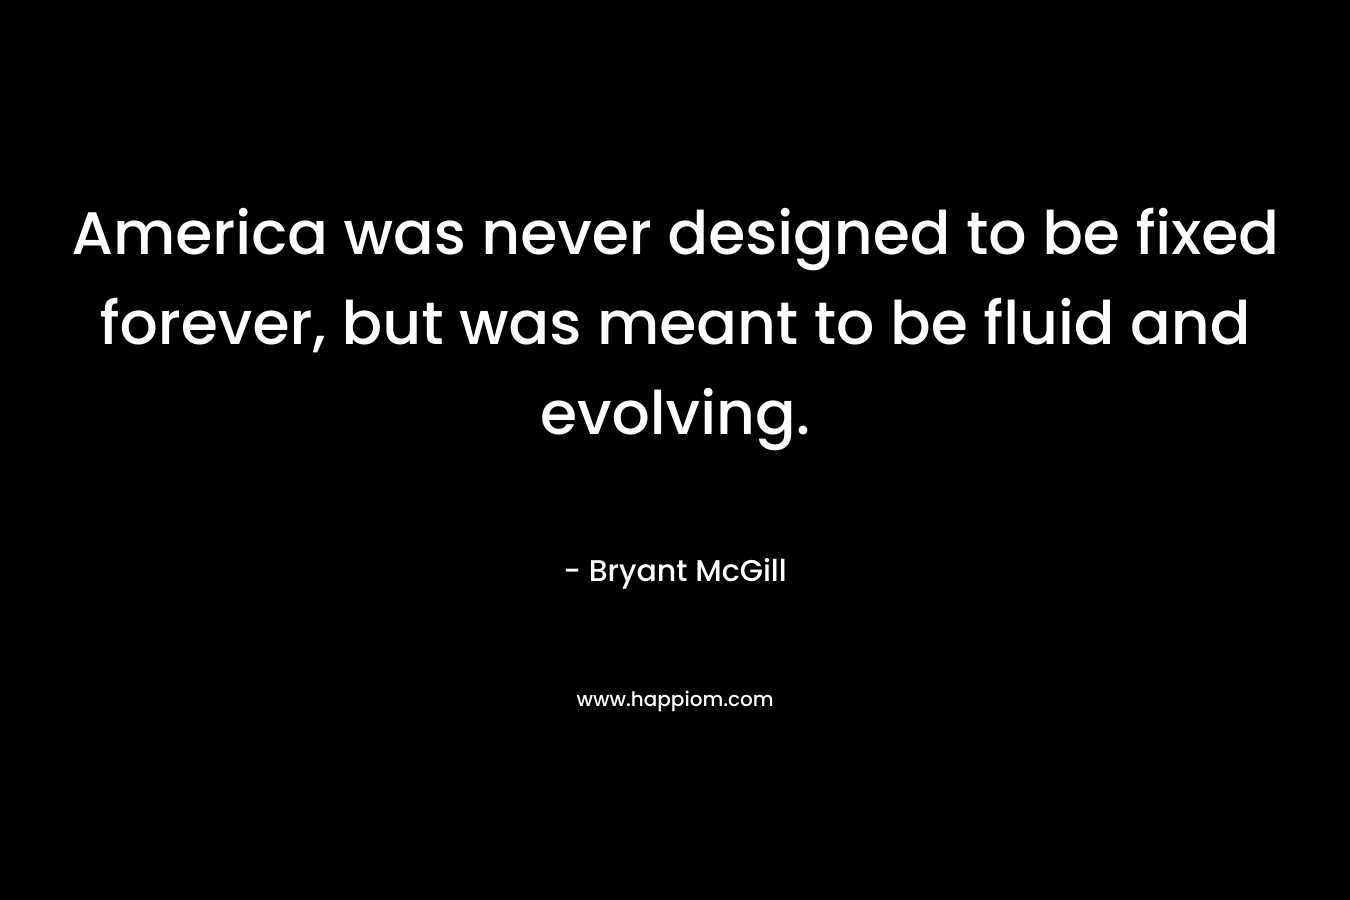 America was never designed to be fixed forever, but was meant to be fluid and evolving.